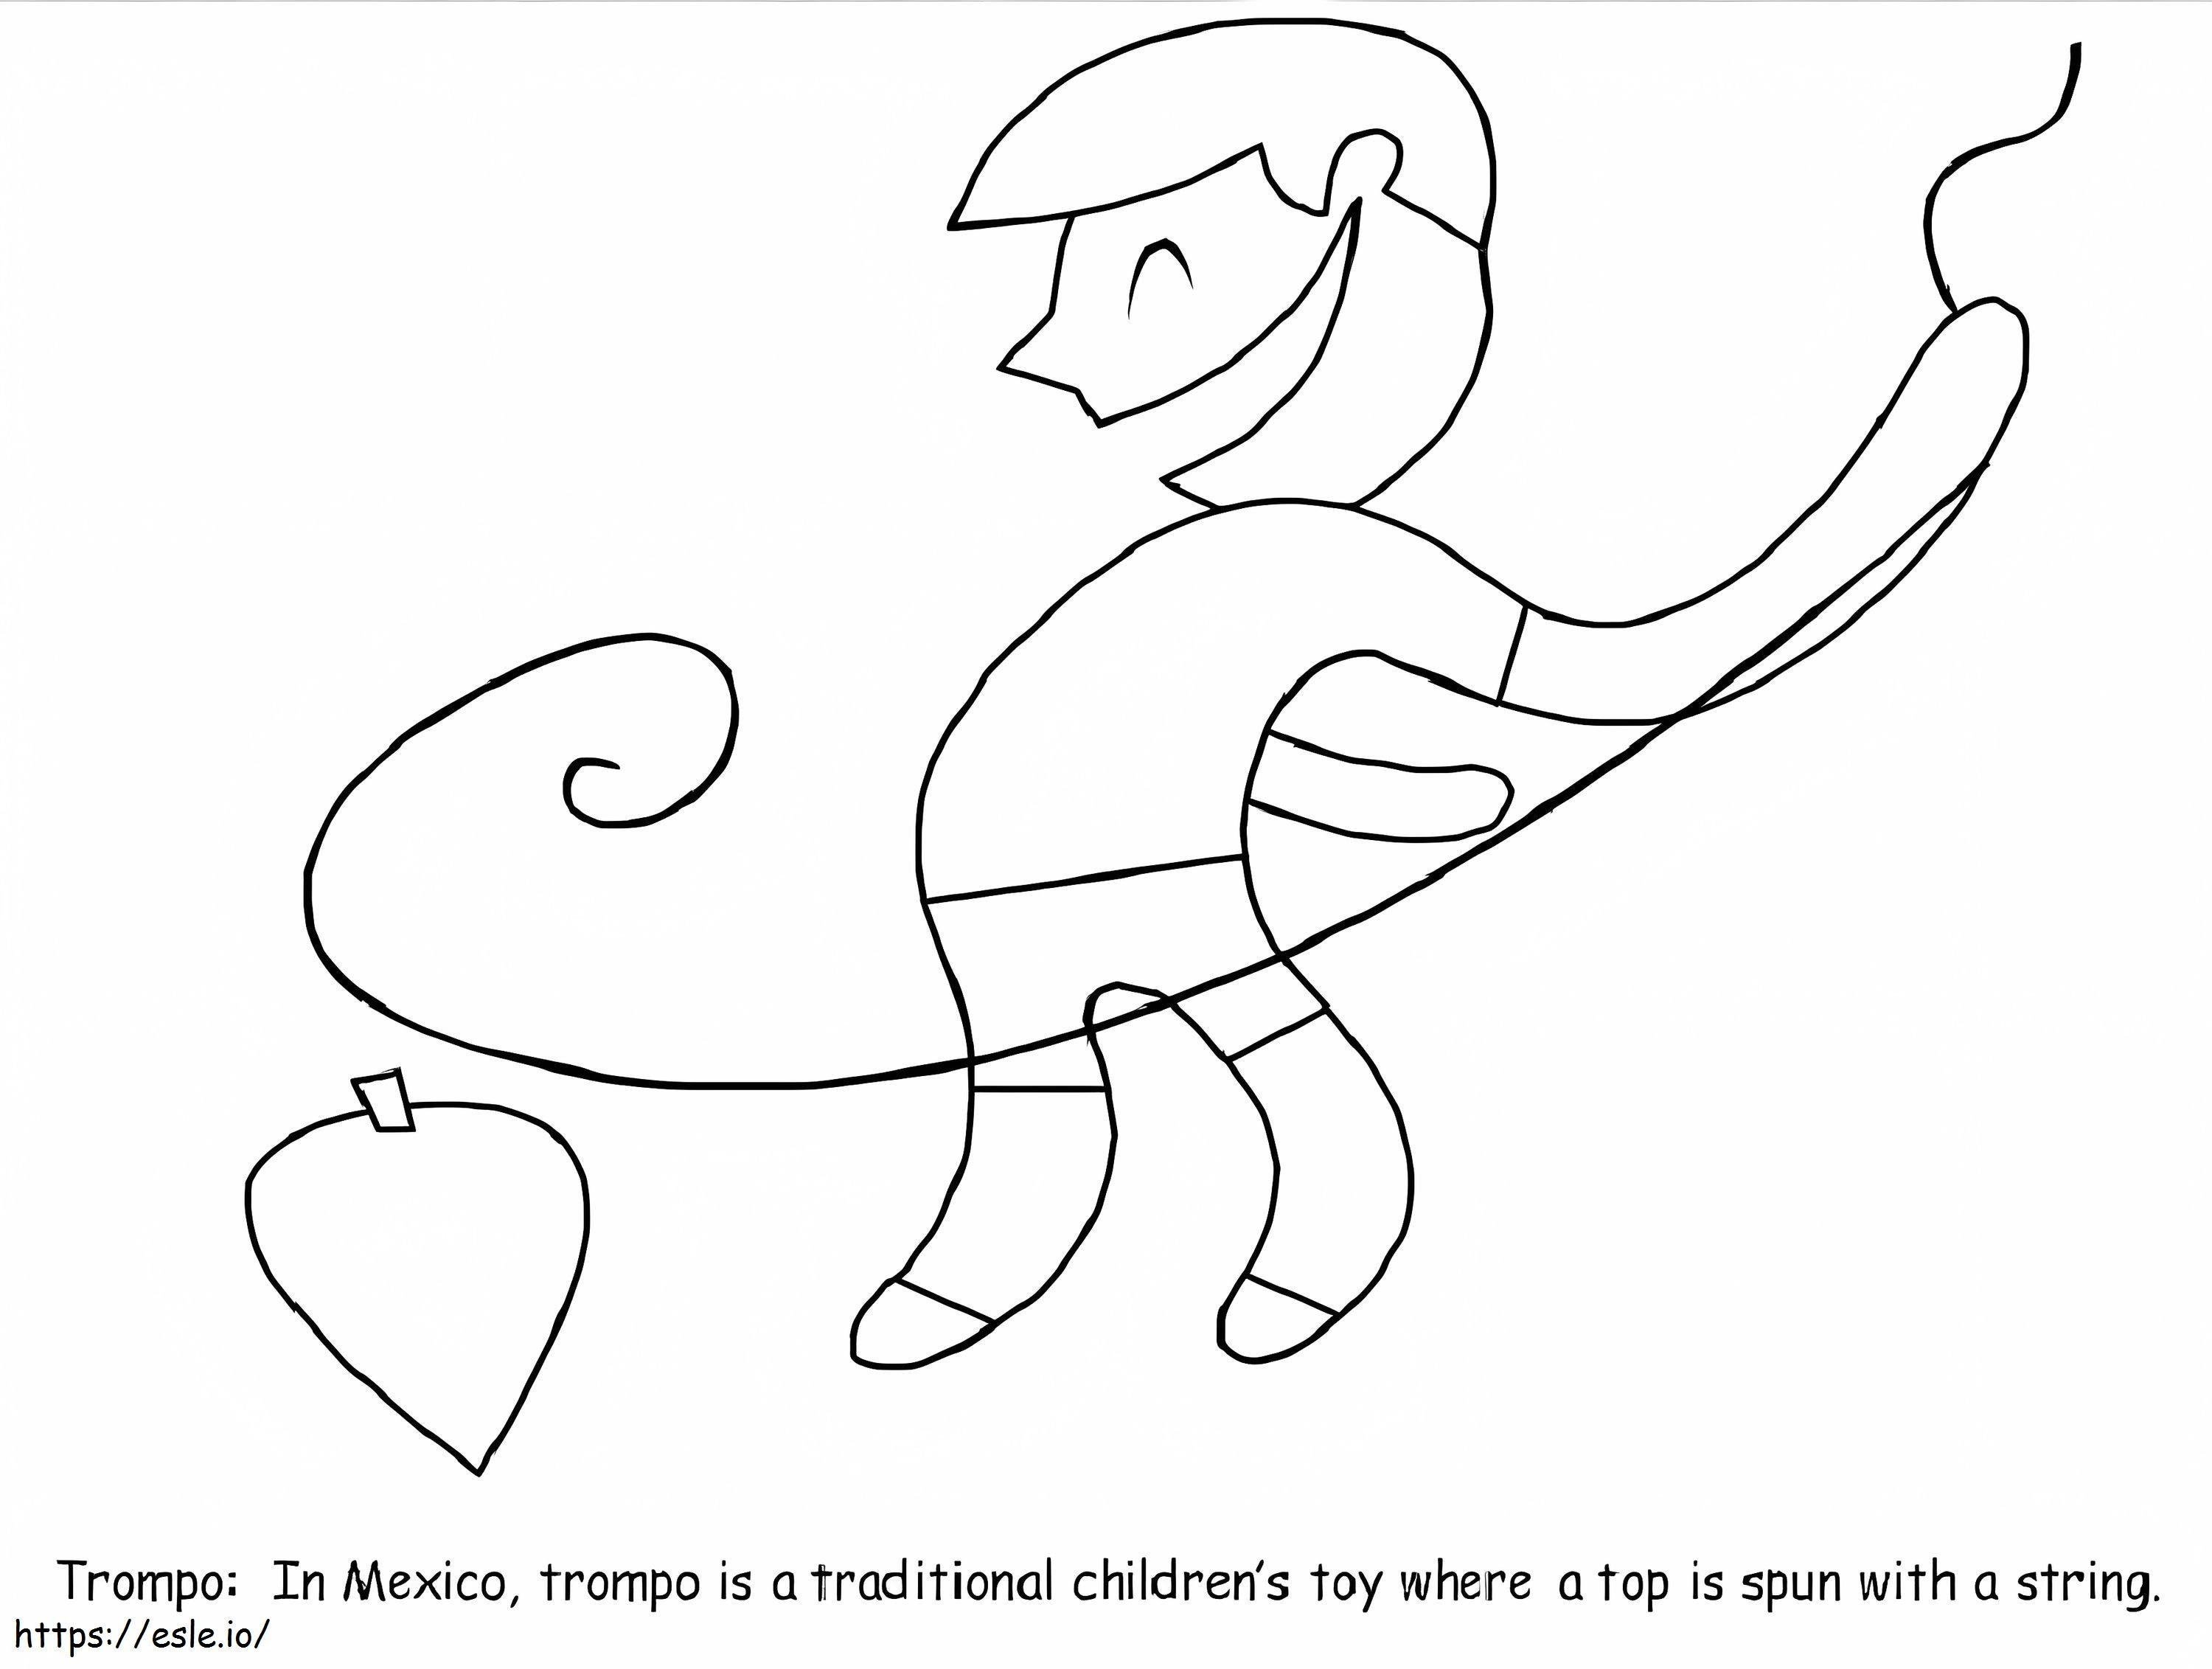 Trompo Toy In Mexico coloring page